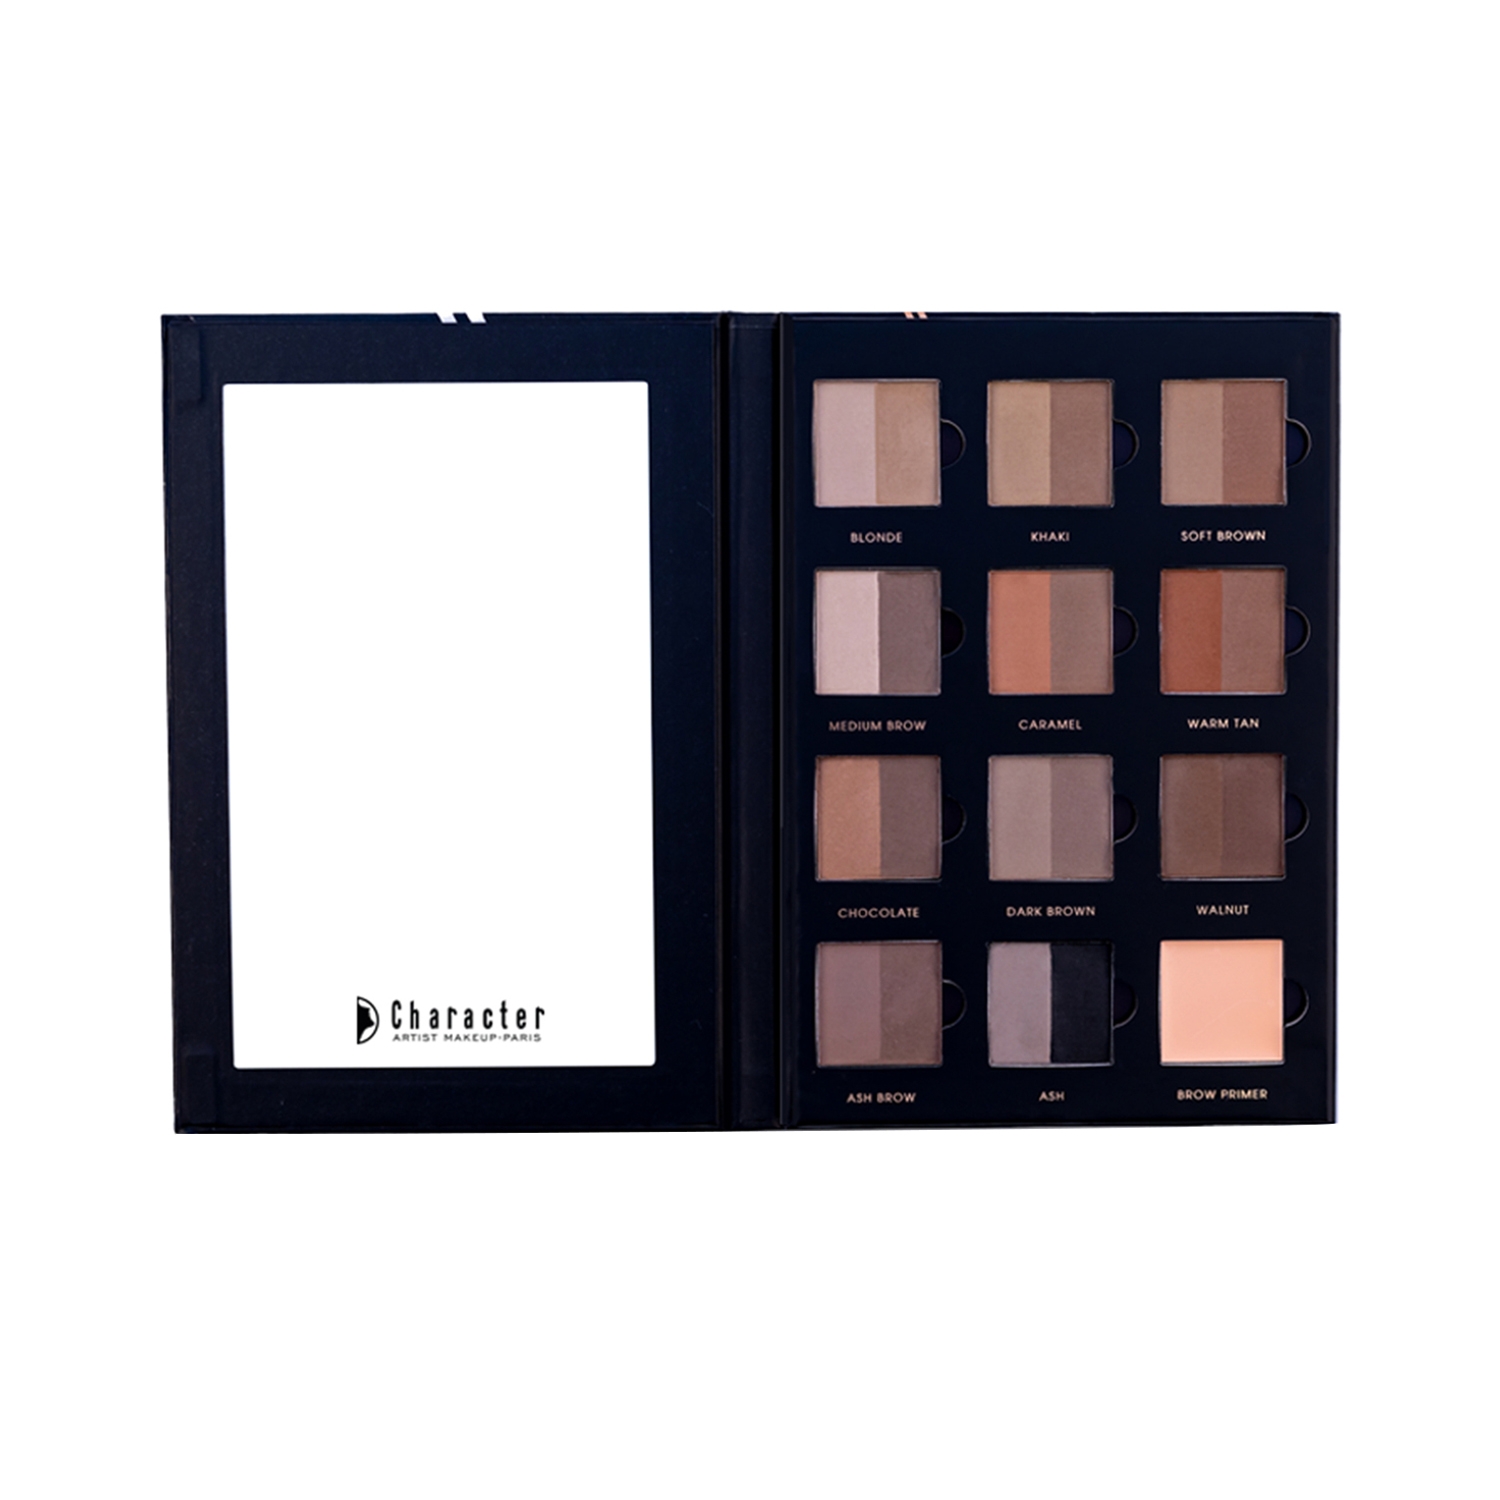 Character Brow Palette - PBP001 (21.6g)